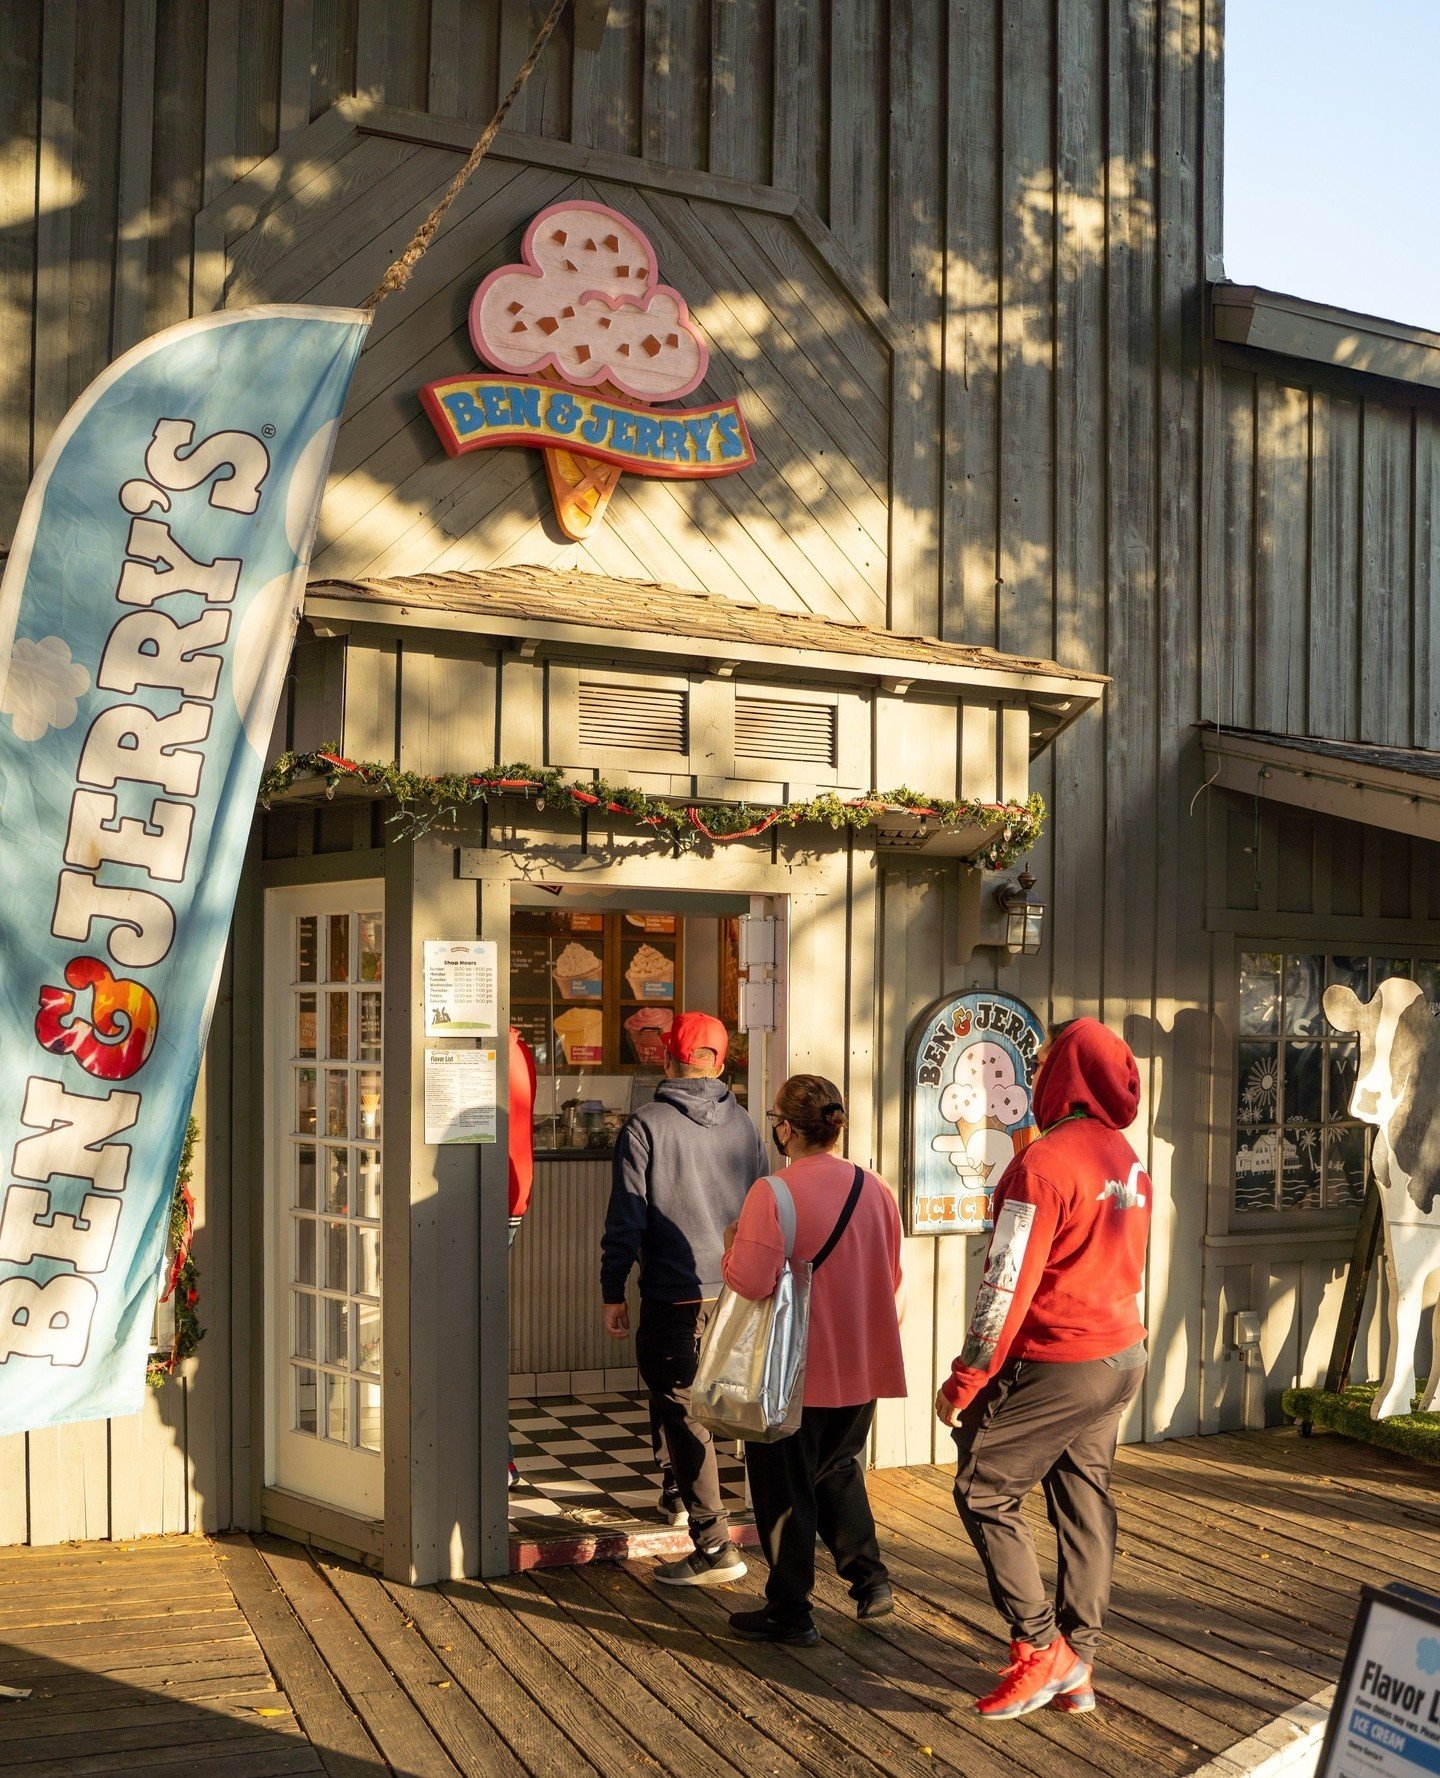 IT'S FREE CONE DAY AT @benandjerrys ‼️🍦💙⁠
⁠
Come grab a cone or cup at our Seaport Village location, located in the Carousel District. Open 10am-9pm. All donations will go to the @monarchschool, an organization that serves unhoused students and the